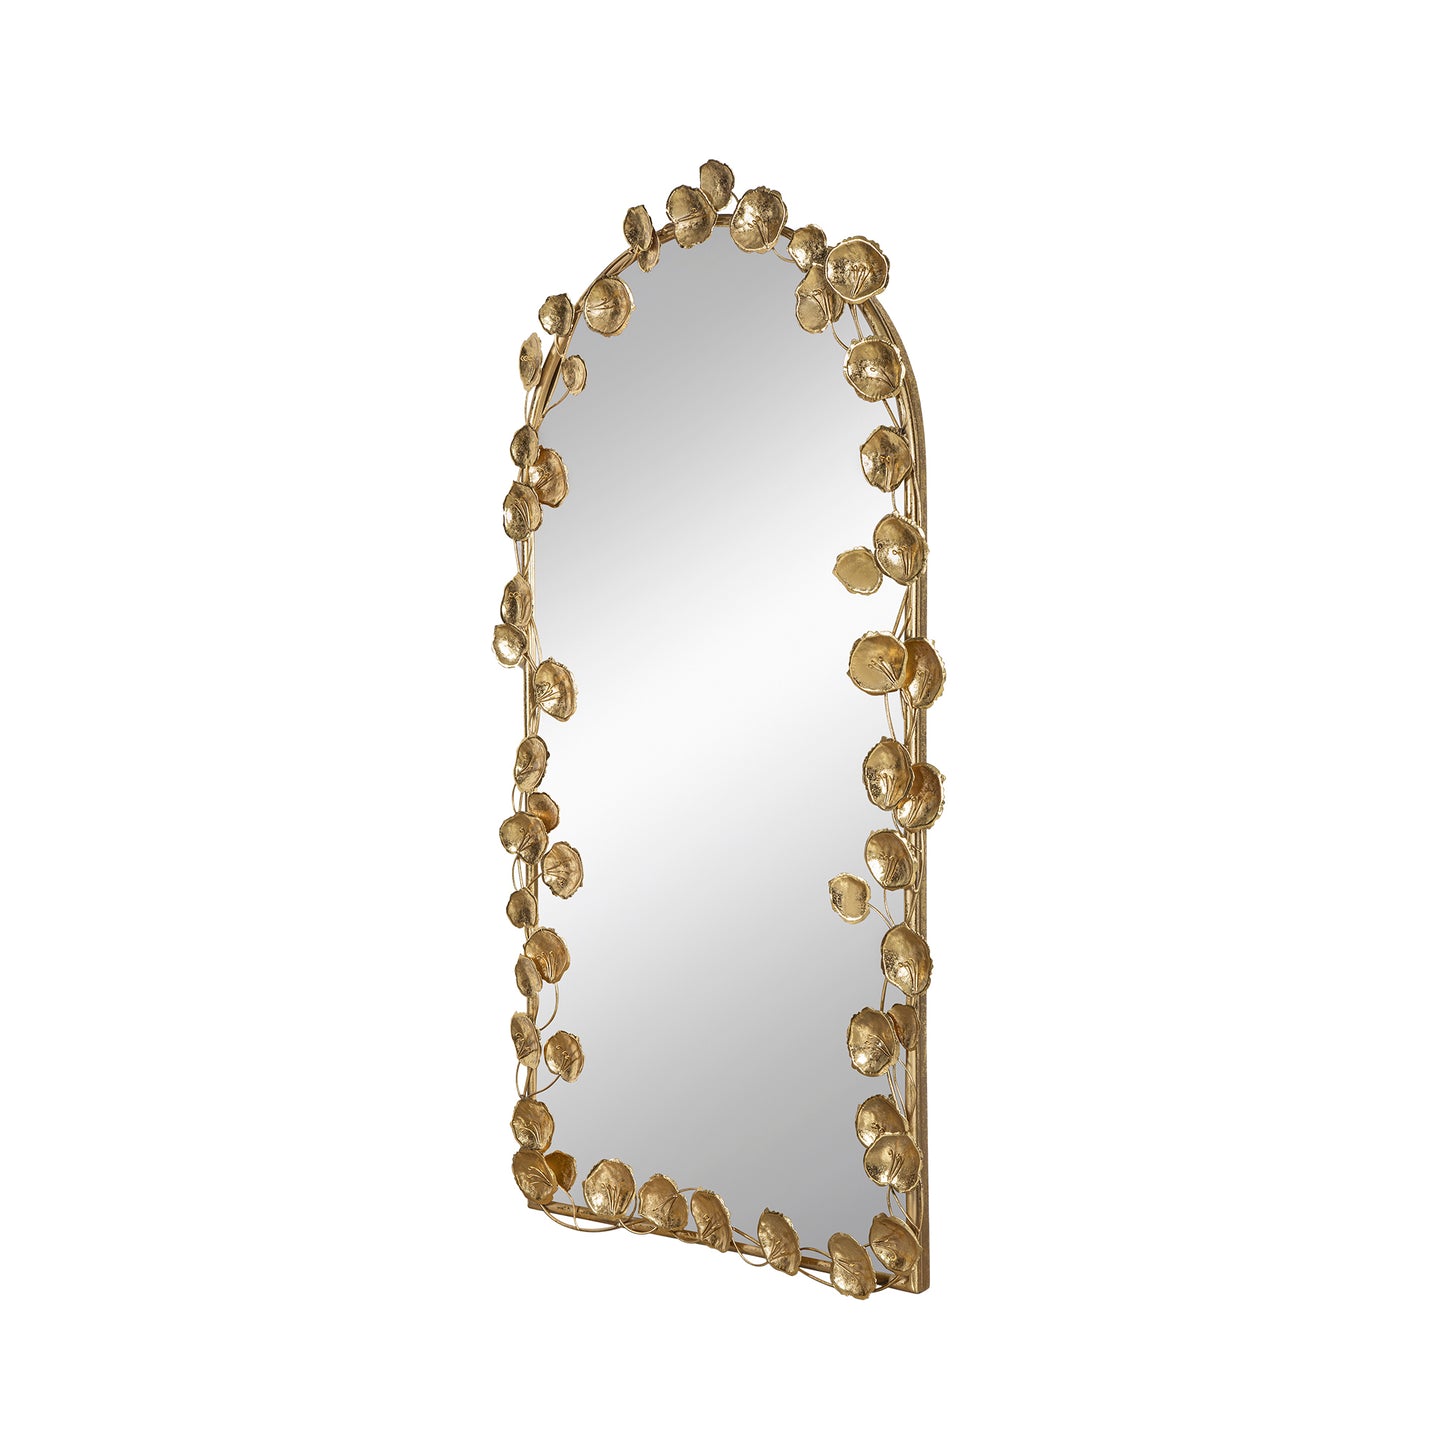 Arched Wall Mirror with Golden Leaf Accents